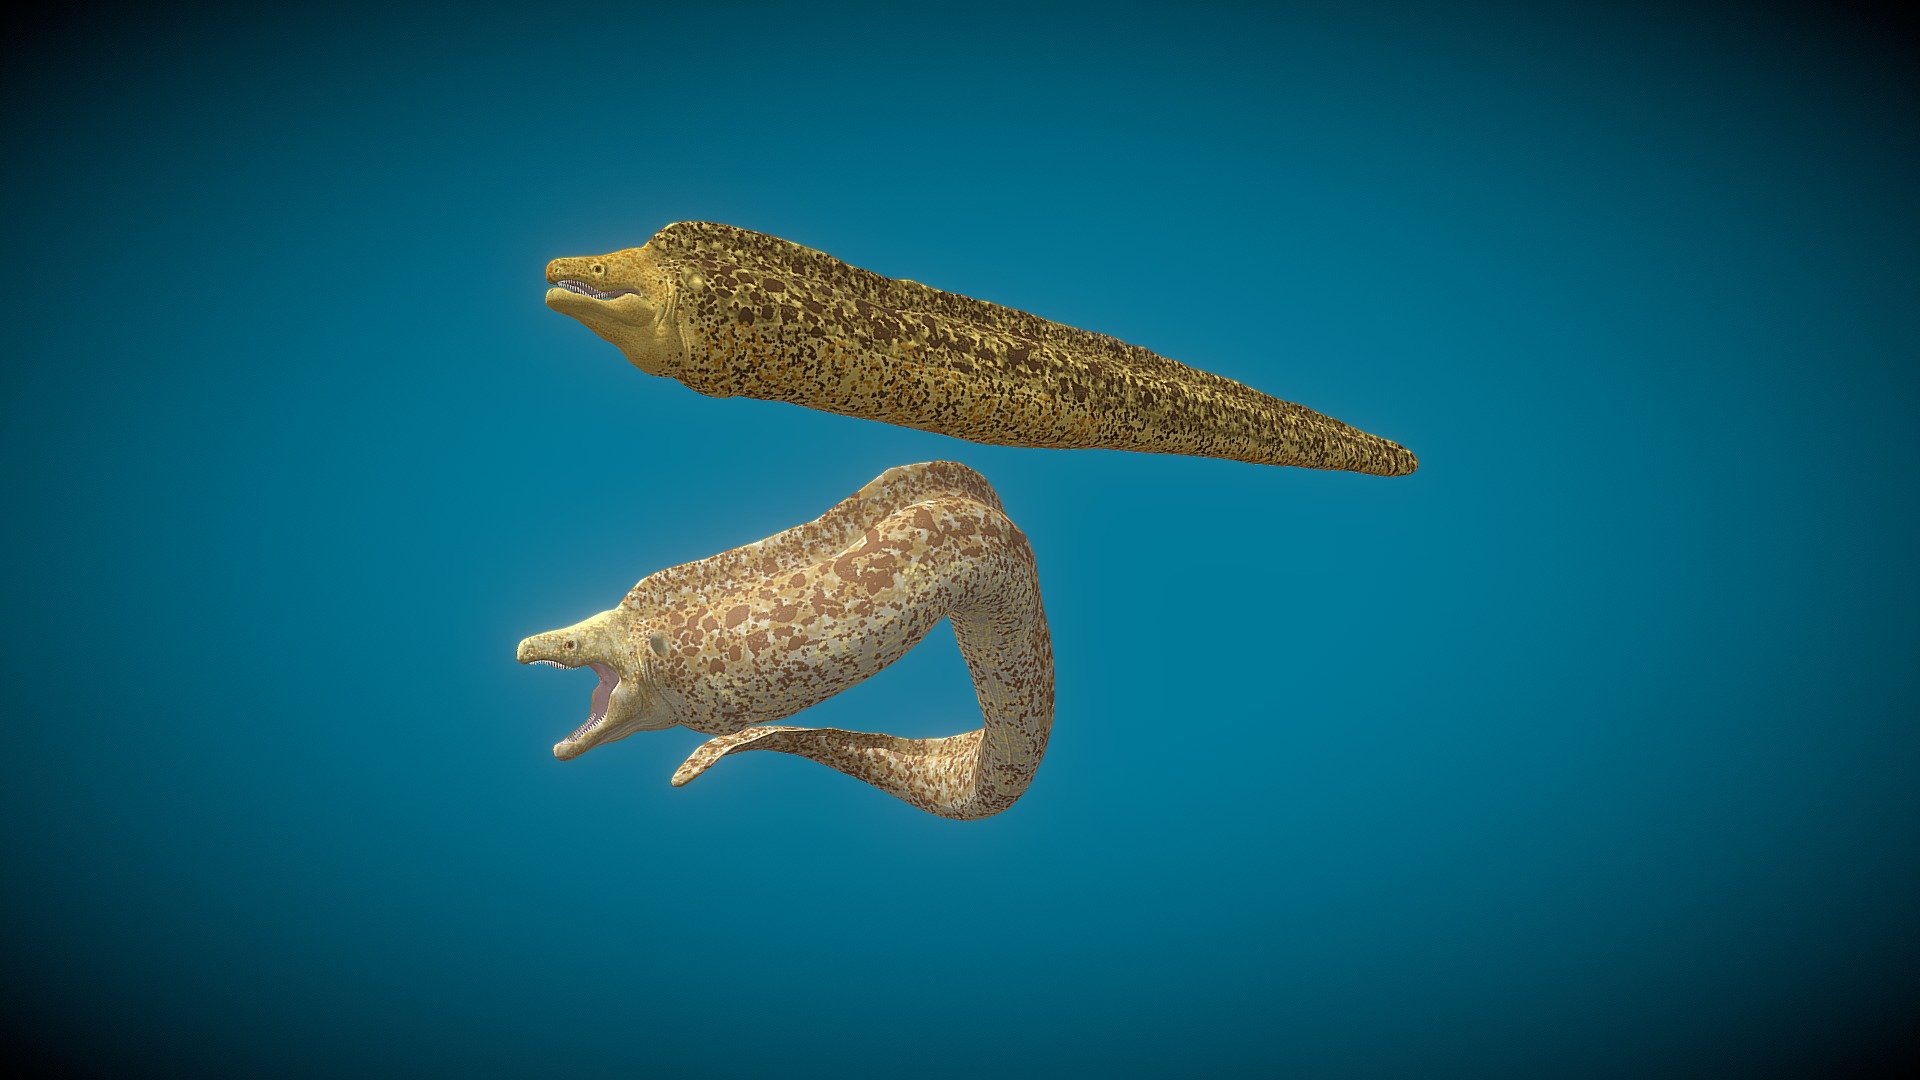 A model of a Moray eel.
Modeled in Blender. 4.292 faces.
textured in Substance Painter and rigged in blender.
there are 2 different albedo texture so you can choose between the one you like the most. The model is rigged and completely functional, so you will be able to pose it or animate it.
This model can be used for some scene rends about sealife, or using it in a game where you can fish or go under the water.
As extra file i added a Blender Scene where you can find these 2 models already integrated and an extra model that uses Curves to move and simulate it is snaking.
Hope you like It! - Moray Eel - Buy Royalty Free 3D model by Gomizard 3d model